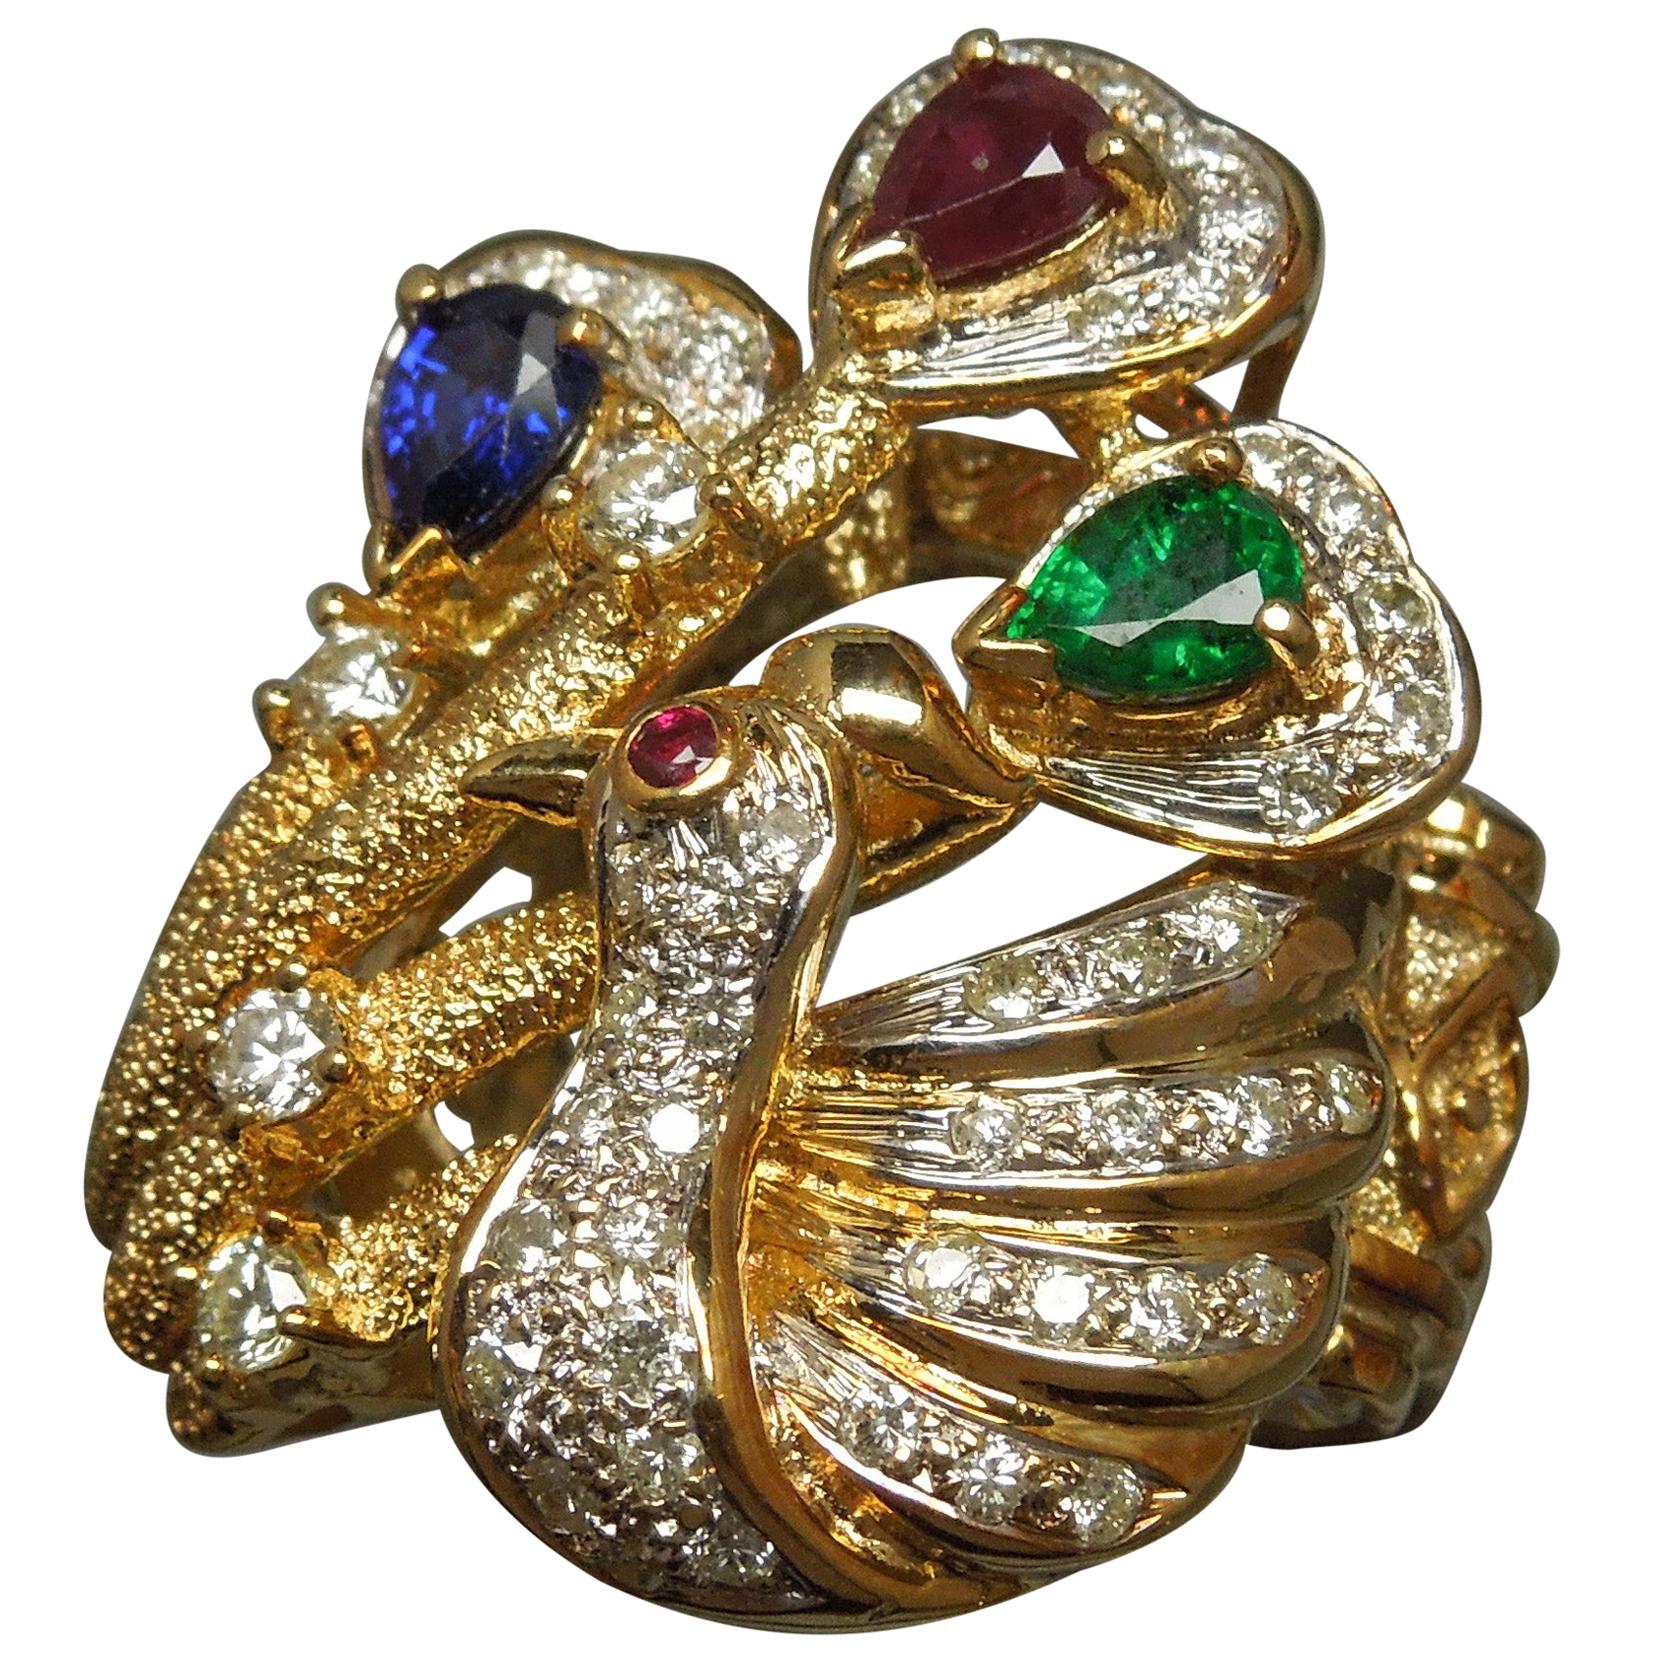 Precious Gemstone Gold Peacock Statement Ring For Sale